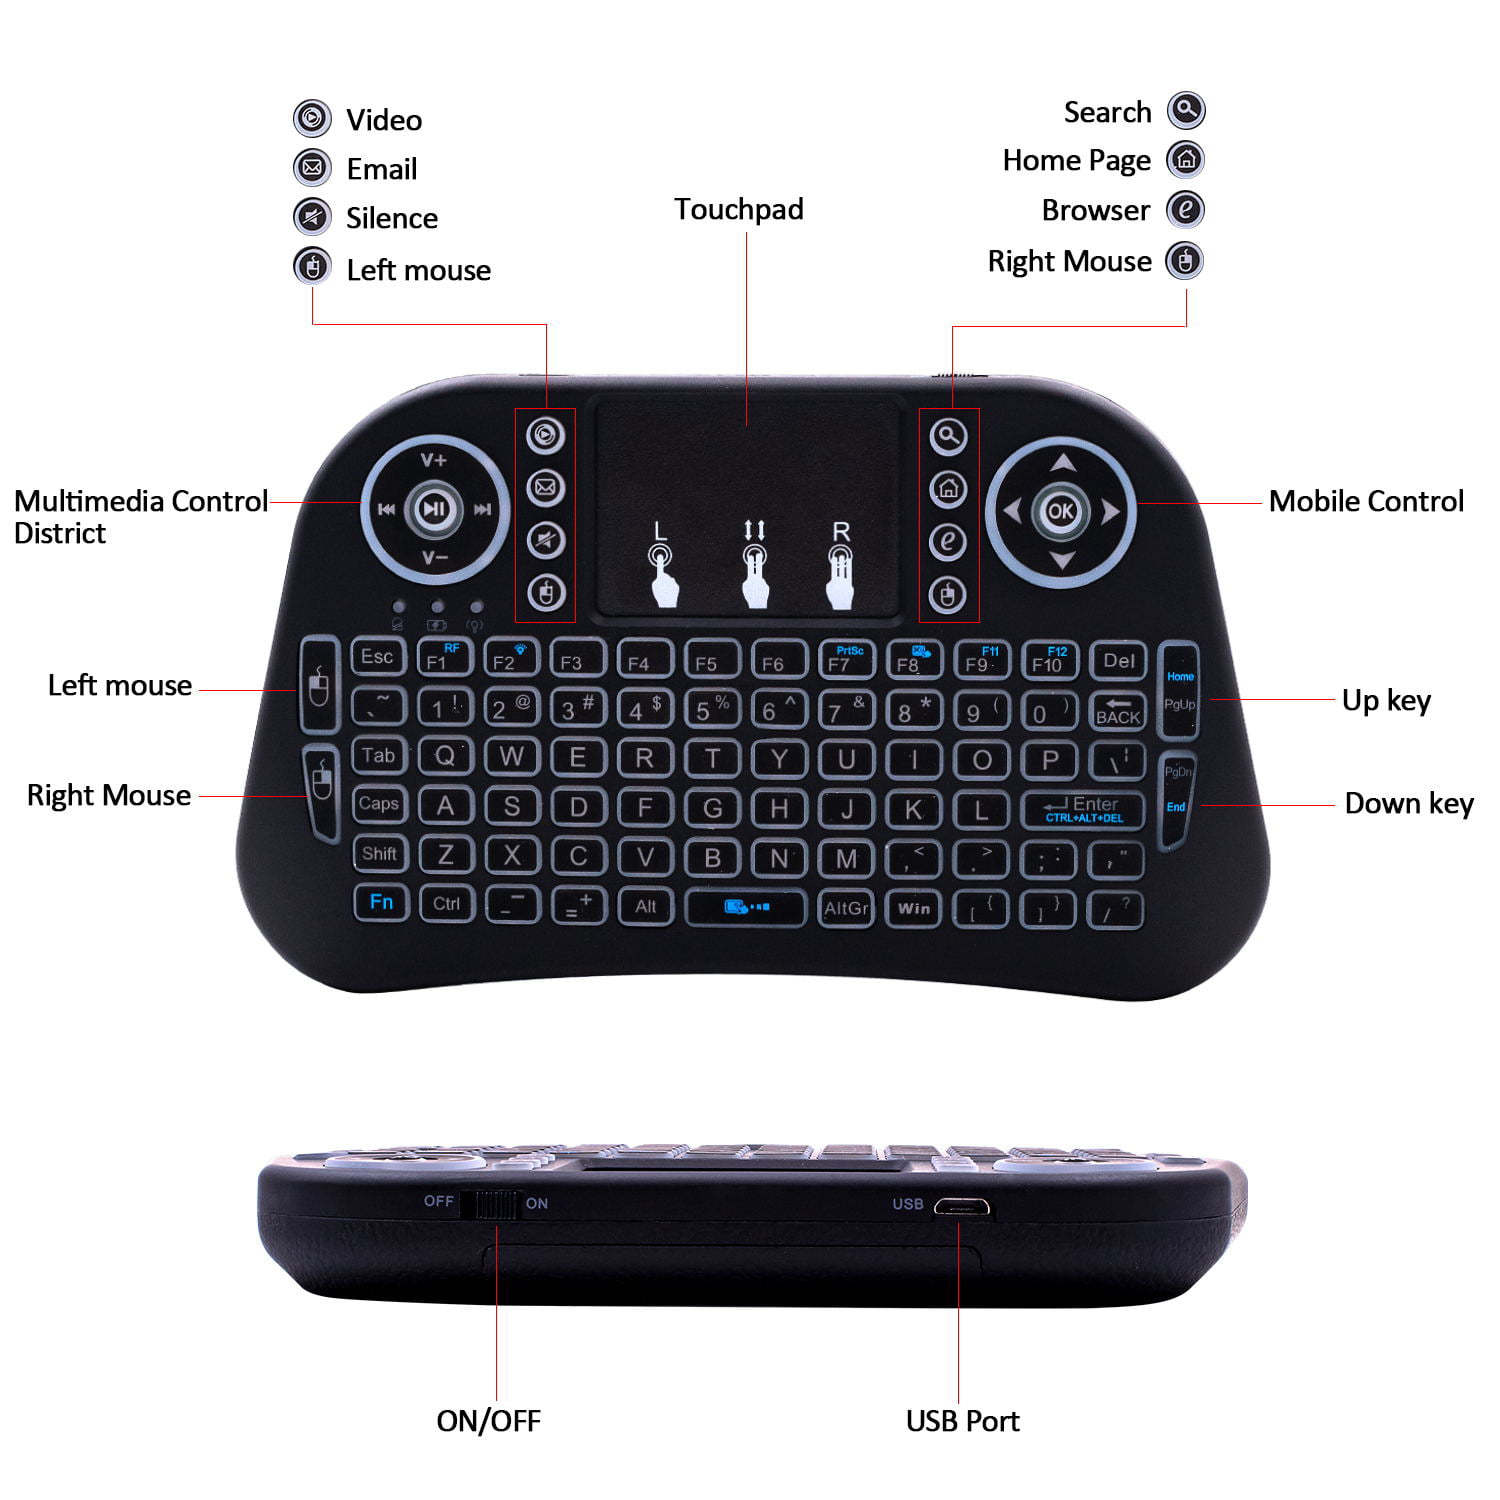 6.30 x 3.54 x 0.79 Inches Windows 7 Windows CE Suitable for Windows 2000 Accelerated Input 2.4G Wireless Mini Gaming Keyboard with Touchpad Linux Windows Vista Windows XP Black